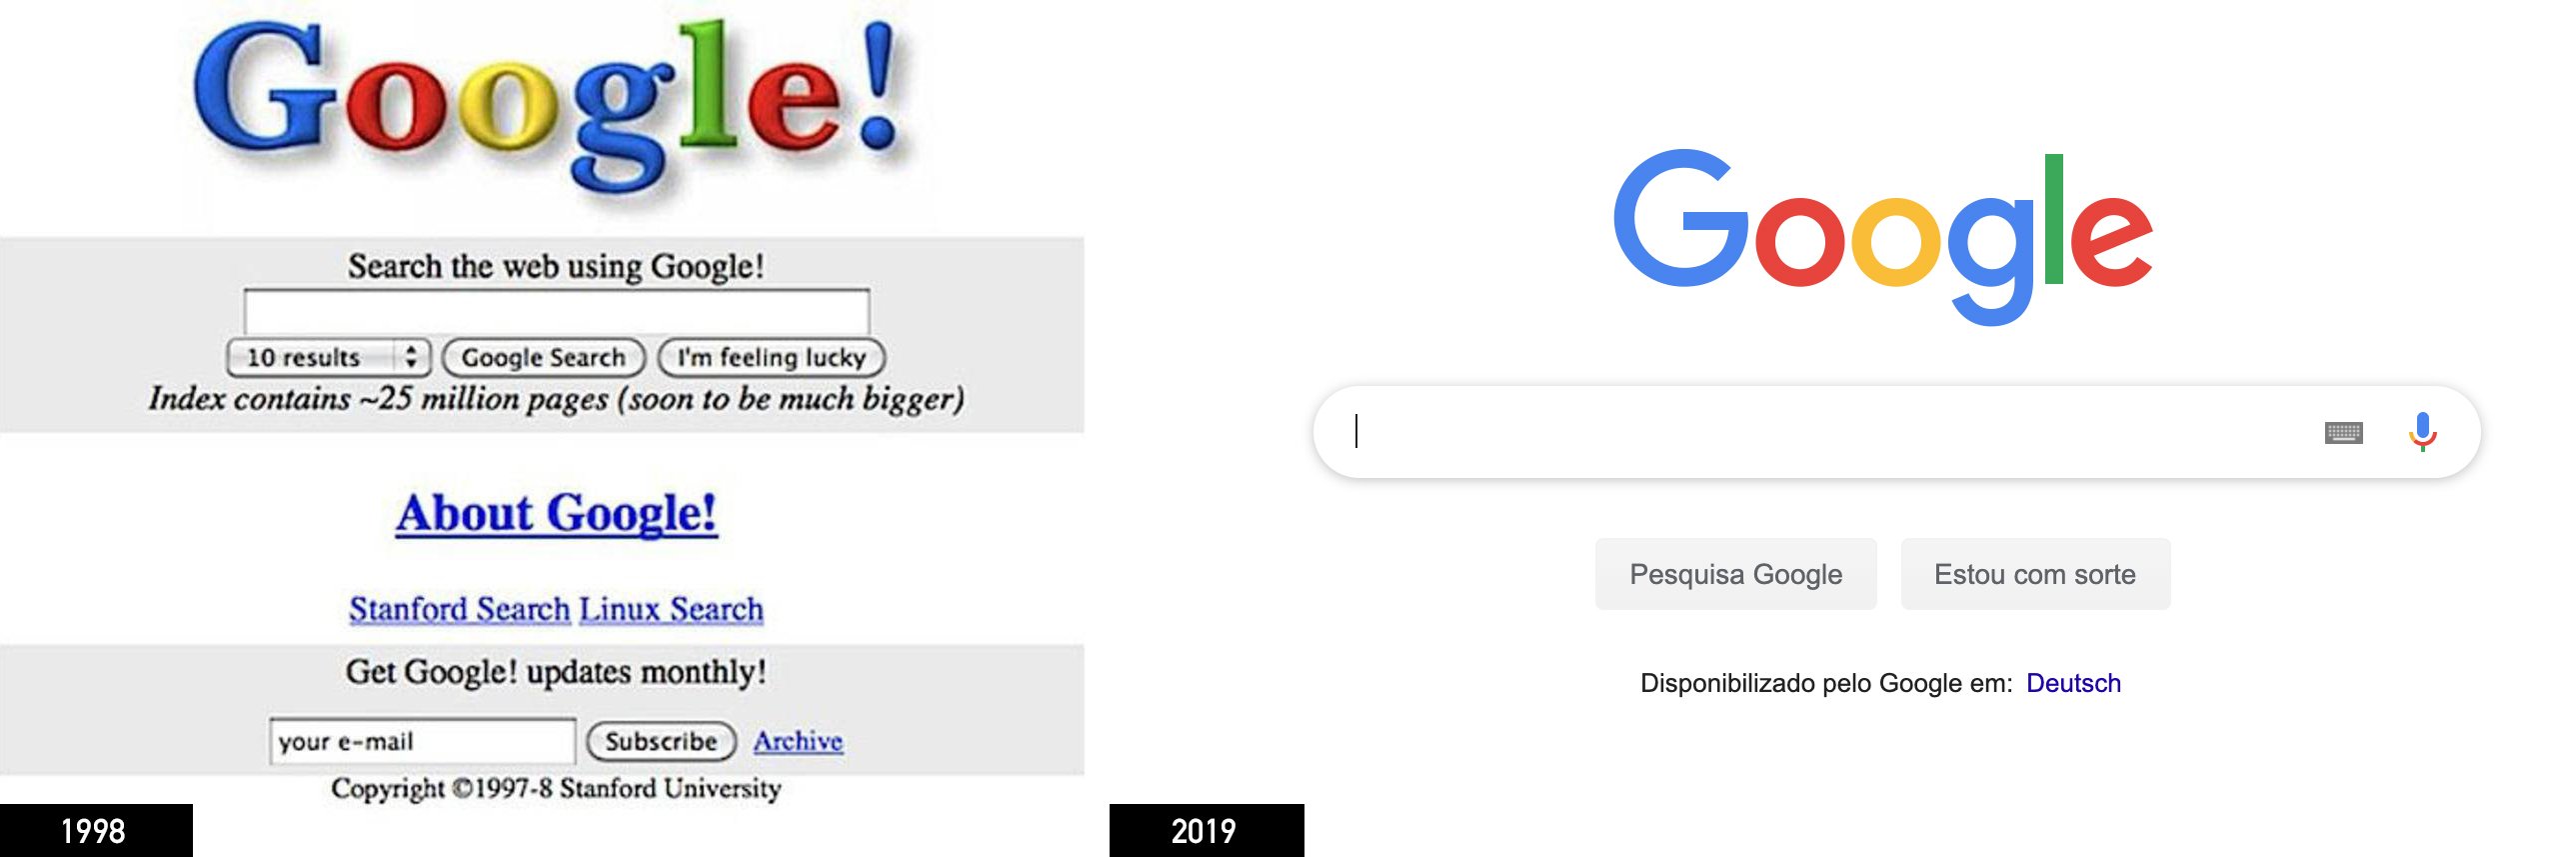 Google in 1998 and 2019